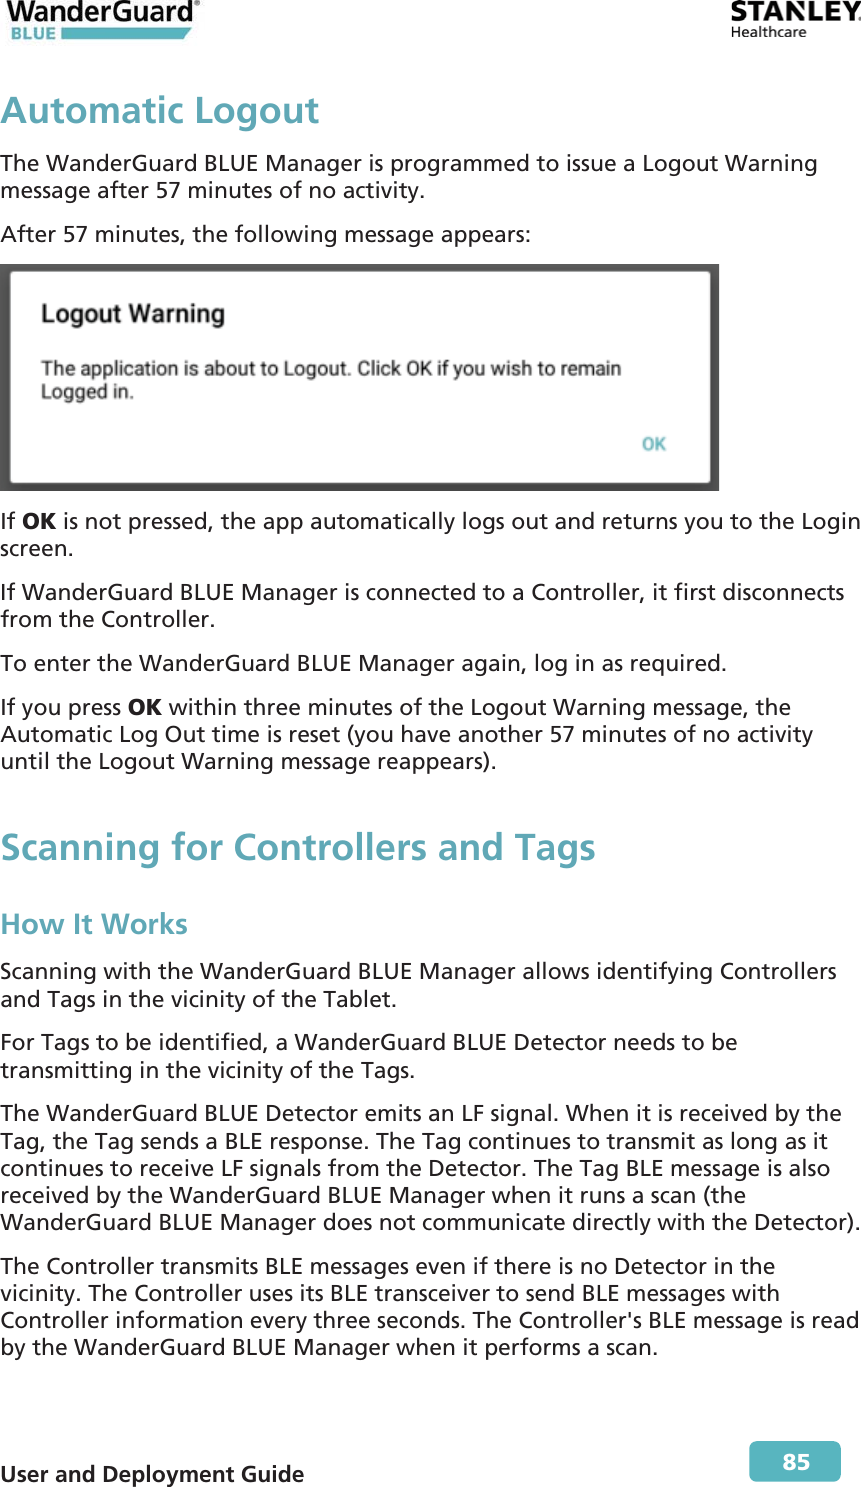  User and Deployment Guide        85 Automatic LogoutThe WanderGuard BLUE Manager is programmed to issue a Logout Warning message after 57 minutes of no activity. After 57 minutes, the following message appears:  If OK is not pressed, the app automatically logs out and returns you to the Login screen. If WanderGuard BLUE Manager is connected to a Controller, it first disconnects from the Controller. To enter the WanderGuard BLUE Manager again, log in as required. If you press OK within three minutes of the Logout Warning message, the Automatic Log Out time is reset (you have another 57 minutes of no activity until the Logout Warning message reappears). Scanning for Controllers and Tags  How It Works Scanning with the WanderGuard BLUE Manager allows identifying Controllers and Tags in the vicinity of the Tablet. For Tags to be identified, a WanderGuard BLUE Detector needs to be transmitting in the vicinity of the Tags. The WanderGuard BLUE Detector emits an LF signal. When it is received by the Tag, the Tag sends a BLE response. The Tag continues to transmit as long as it continues to receive LF signals from the Detector. The Tag BLE message is also received by the WanderGuard BLUE Manager when it runs a scan (the WanderGuard BLUE Manager does not communicate directly with the Detector). The Controller transmits BLE messages even if there is no Detector in the vicinity. The Controller uses its BLE transceiver to send BLE messages with Controller information every three seconds. The Controller&apos;s BLE message is read by the WanderGuard BLUE Manager when it performs a scan. 